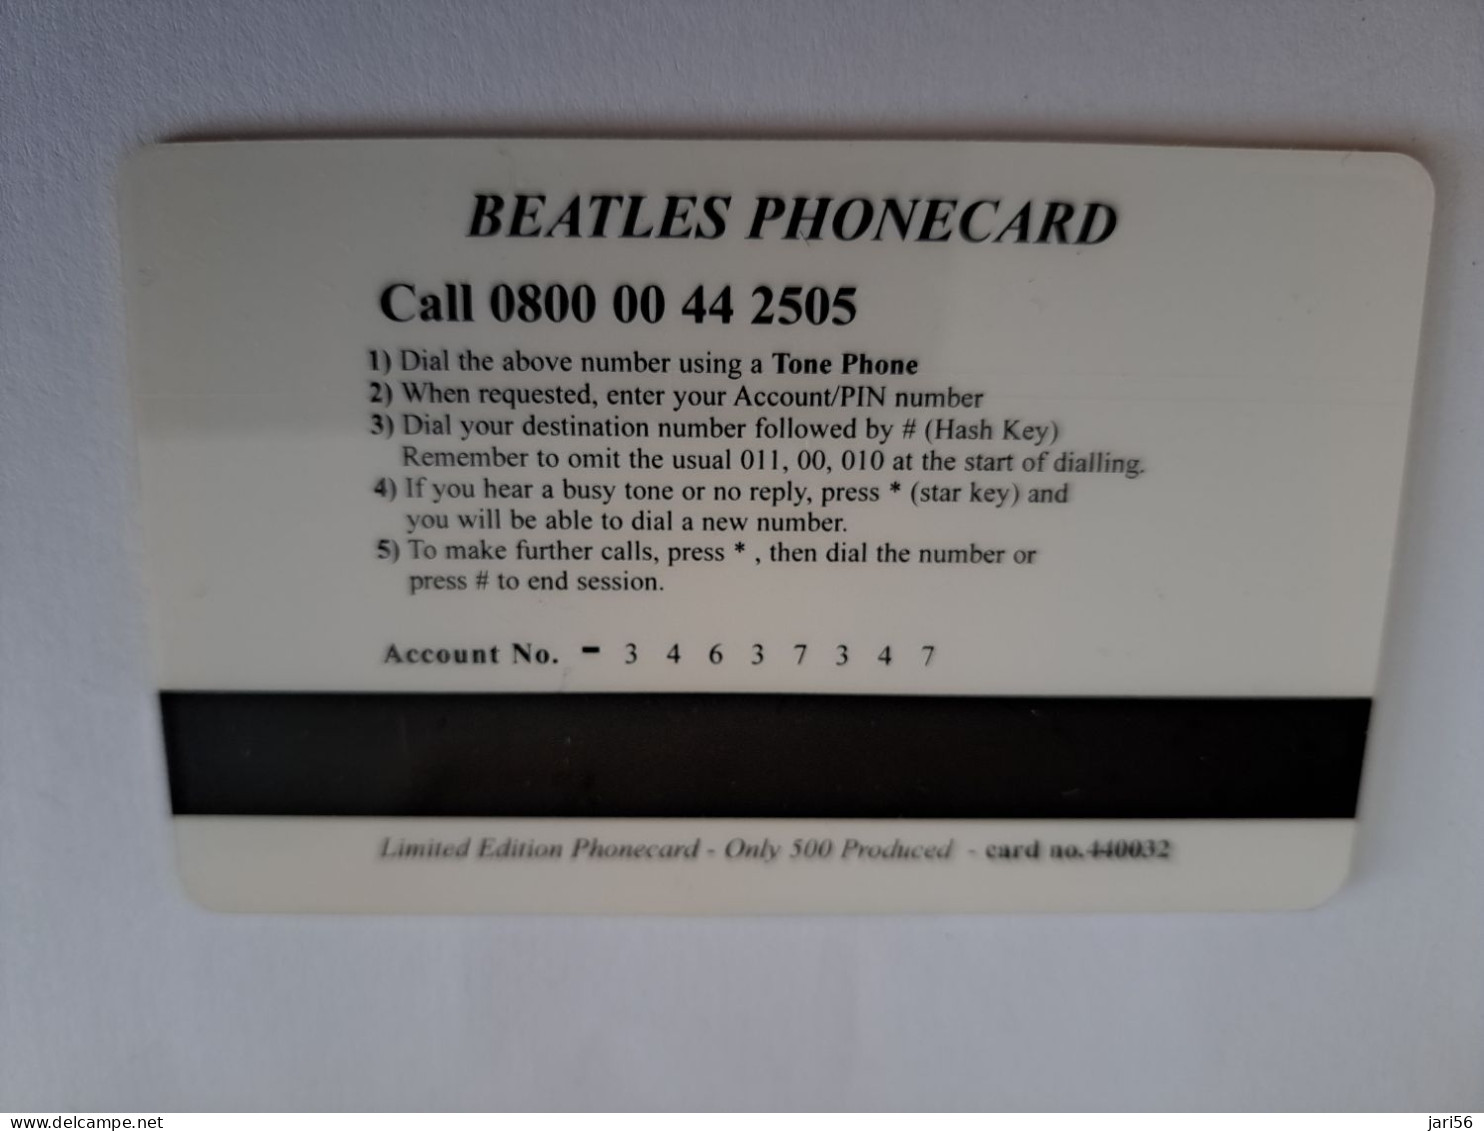 GREAT BRITAIN / 20 POUND /MAGSTRIPE  / BEATLES  PHONECARD/ LIMITED EDITION/  ONLY 500 EX     **15692** - Collections